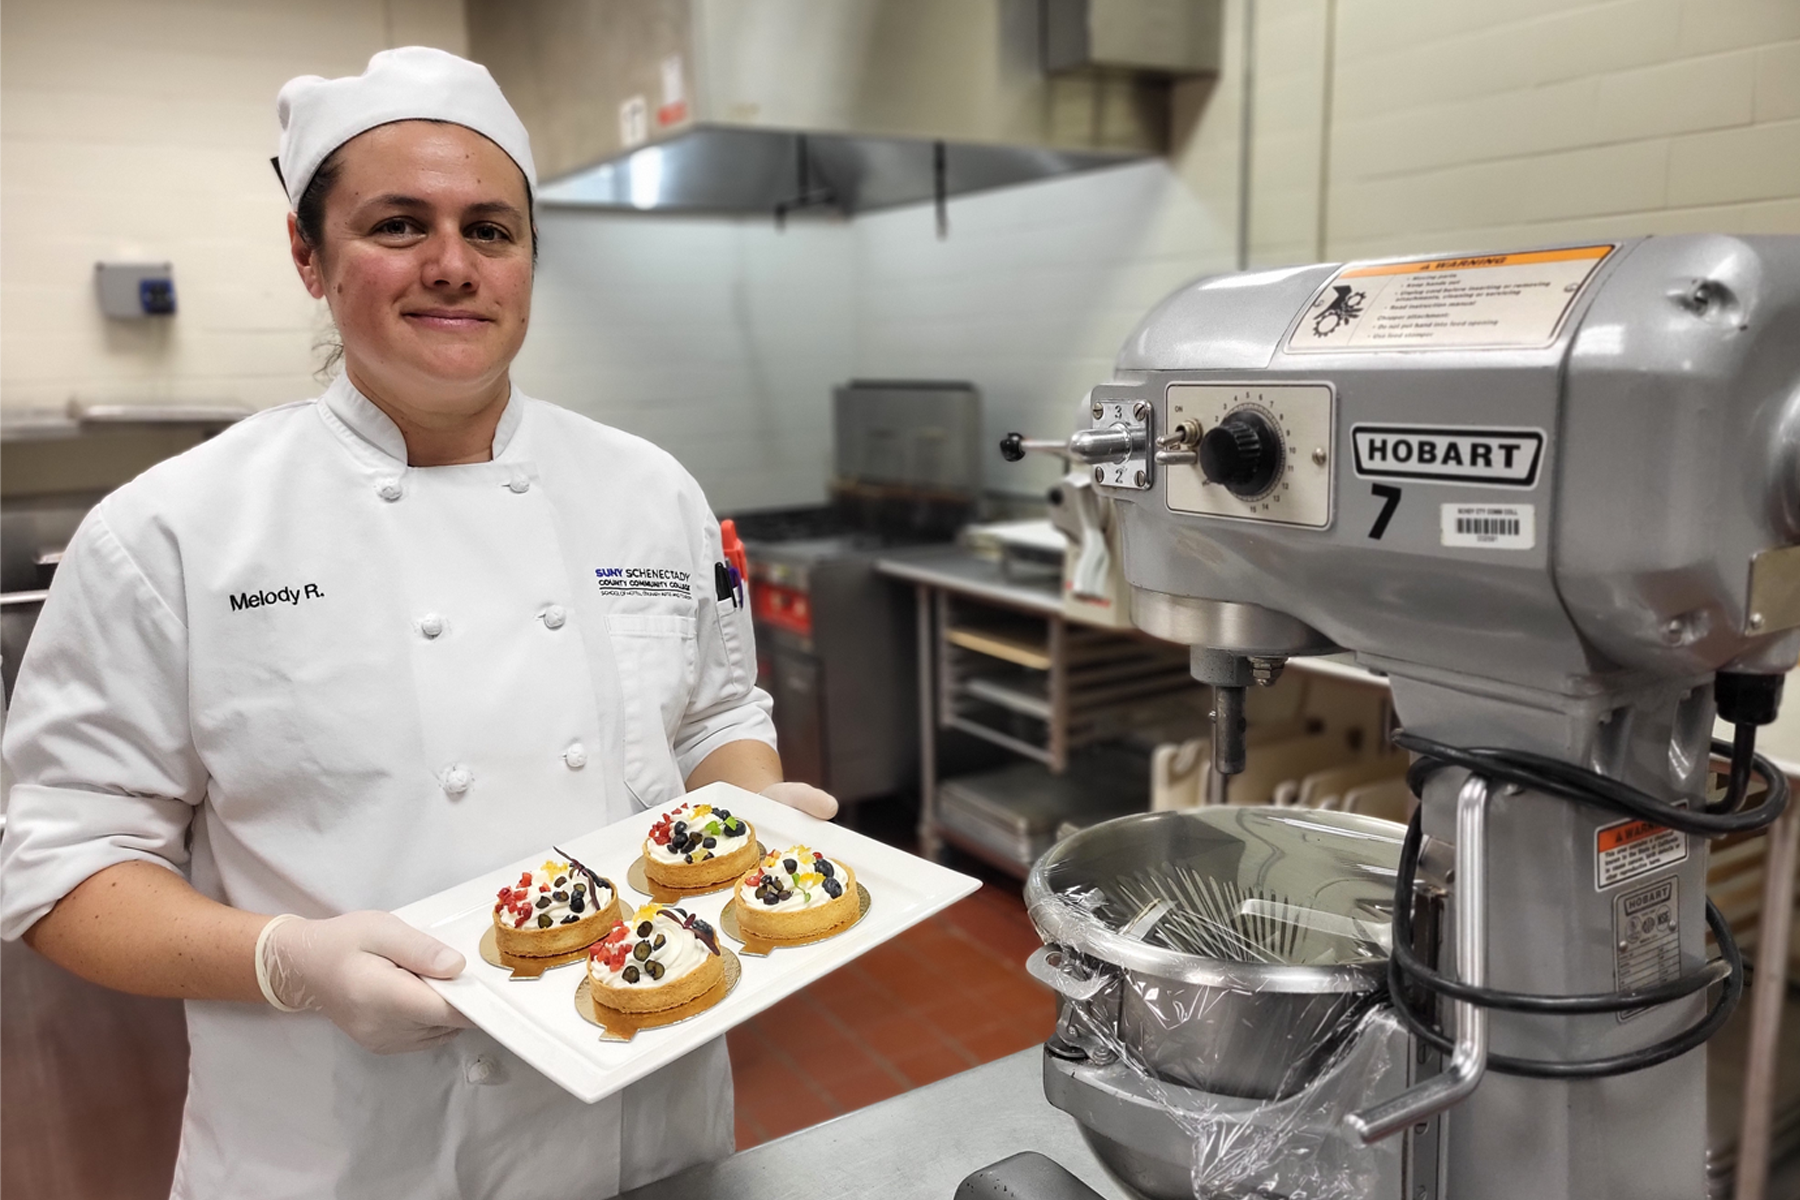 Melody Roper holding dish of baked goods, in culinary uniform, in culinary lab